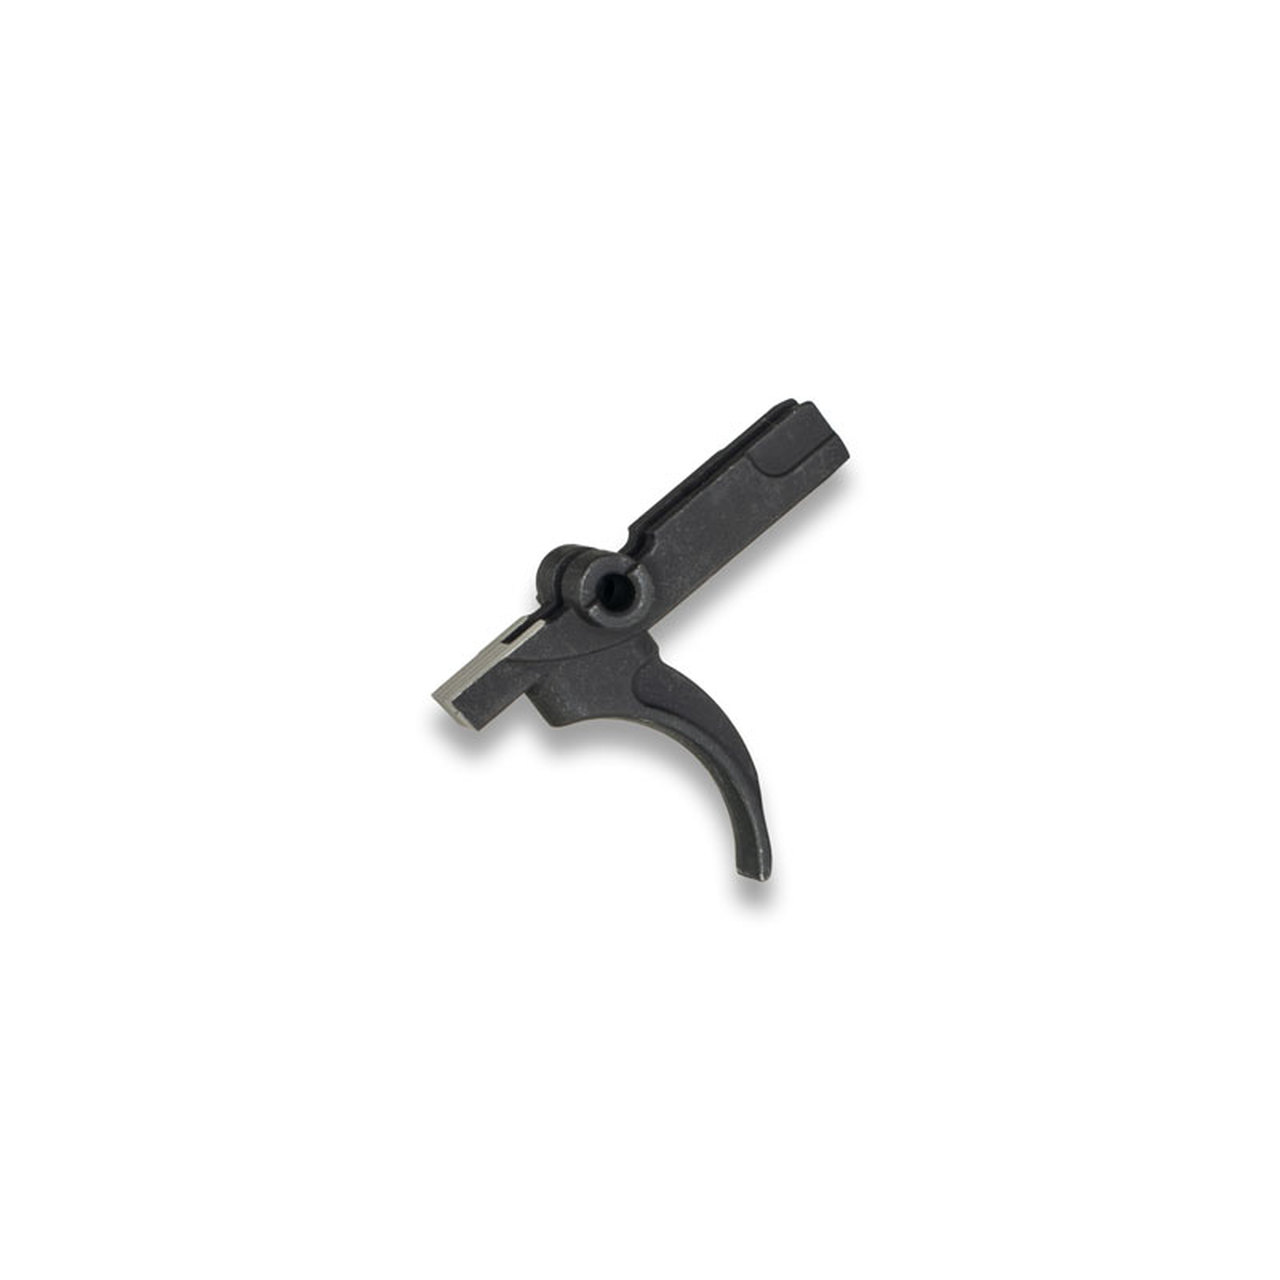 White Label Armory AR15 Trigger - Phosphate Coated